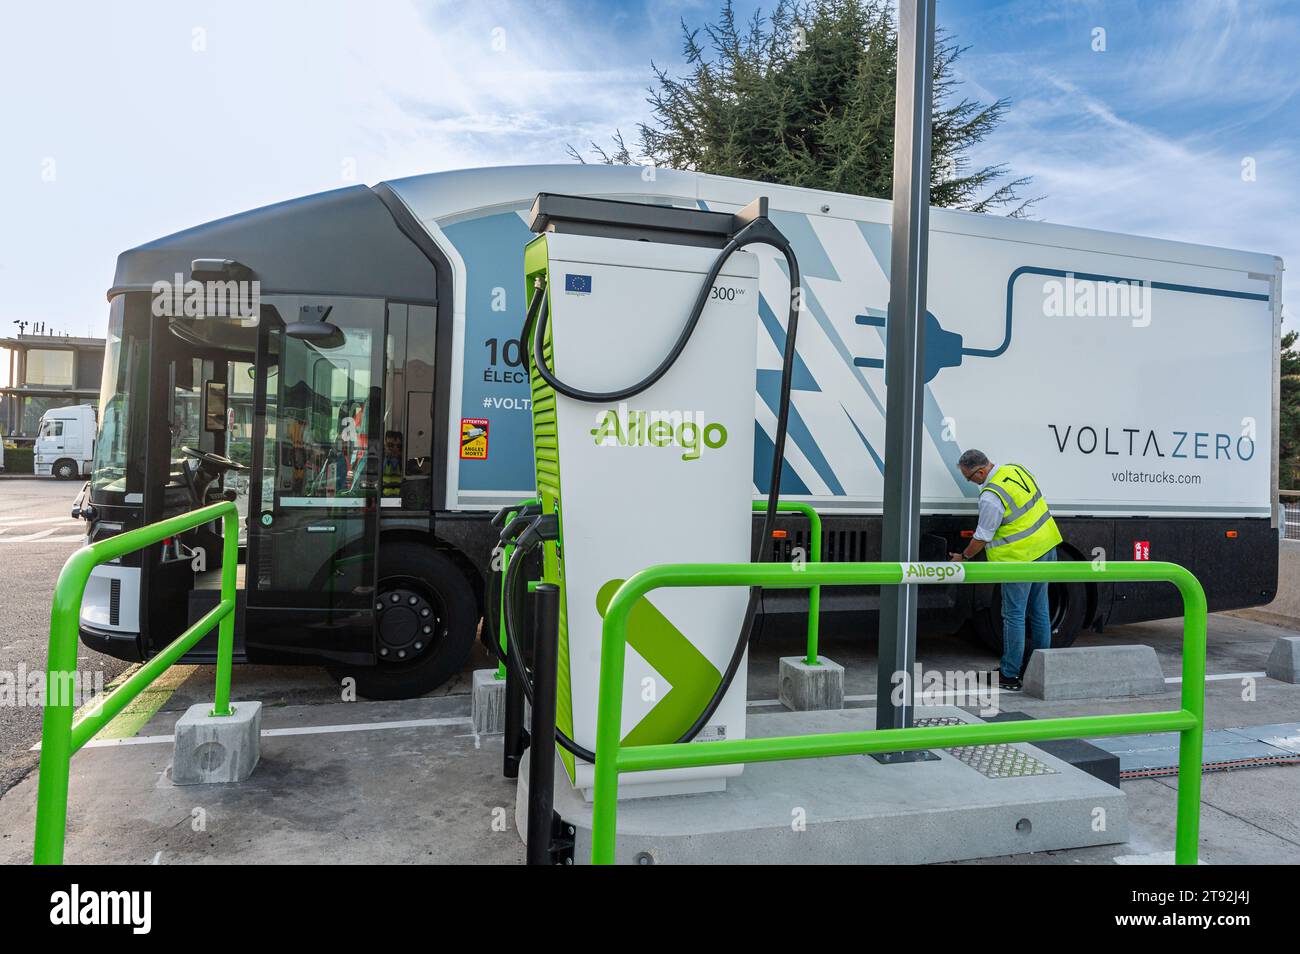 A Volta Zero truck is parked at an Allego charging station. A man in reflective jacket inspects it with a tree and clear blue sky in the background Stock Photo